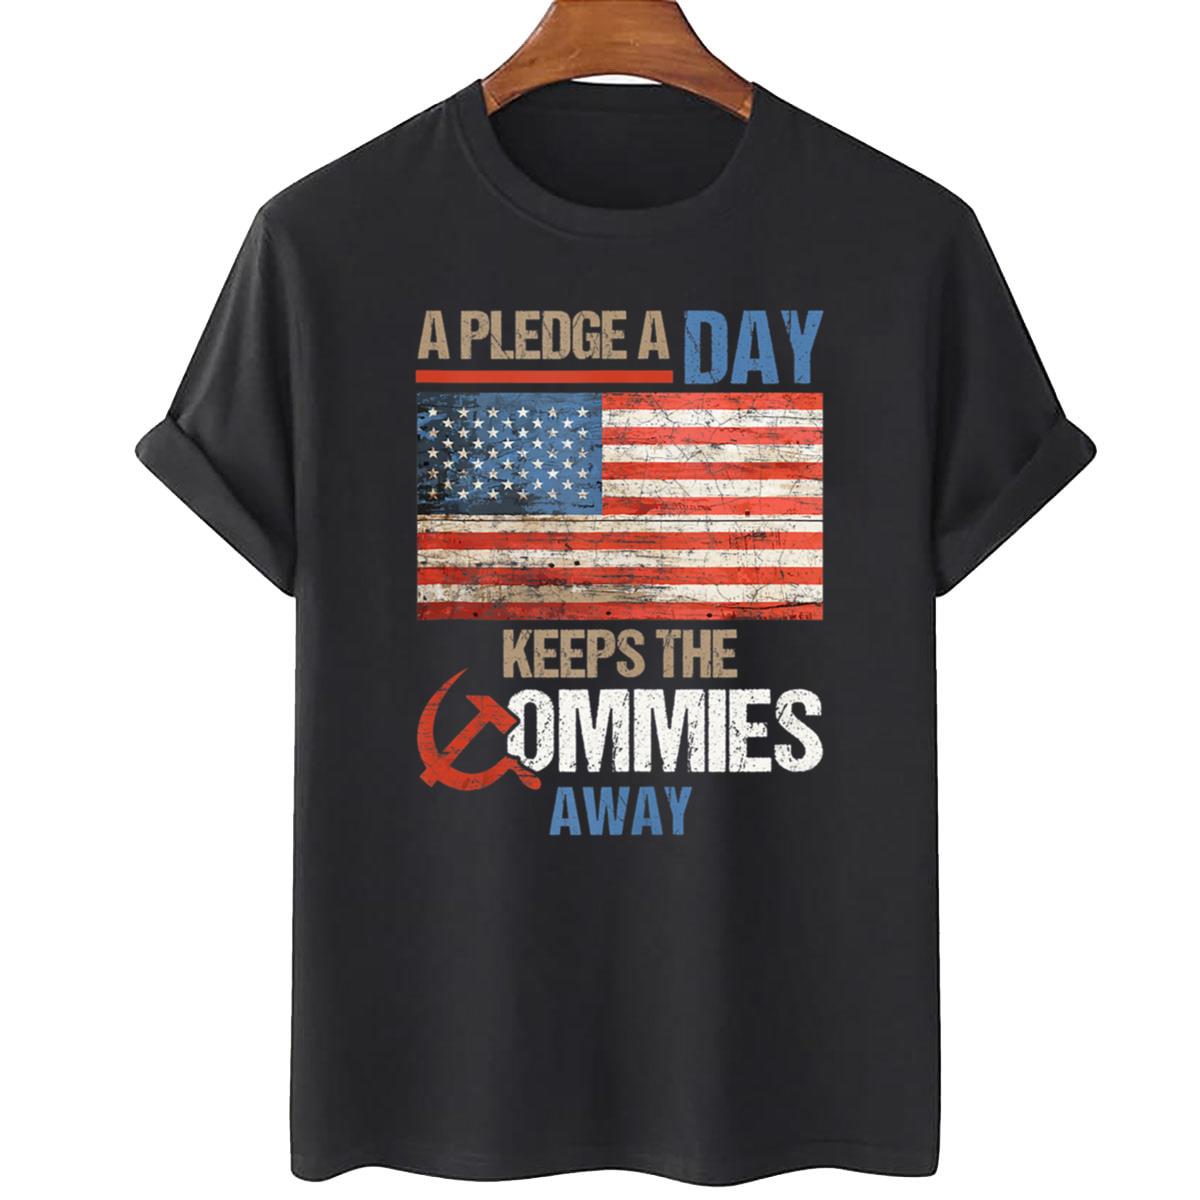 A Pledge A Day Keeps The Commies Away American Flag T-Shirt